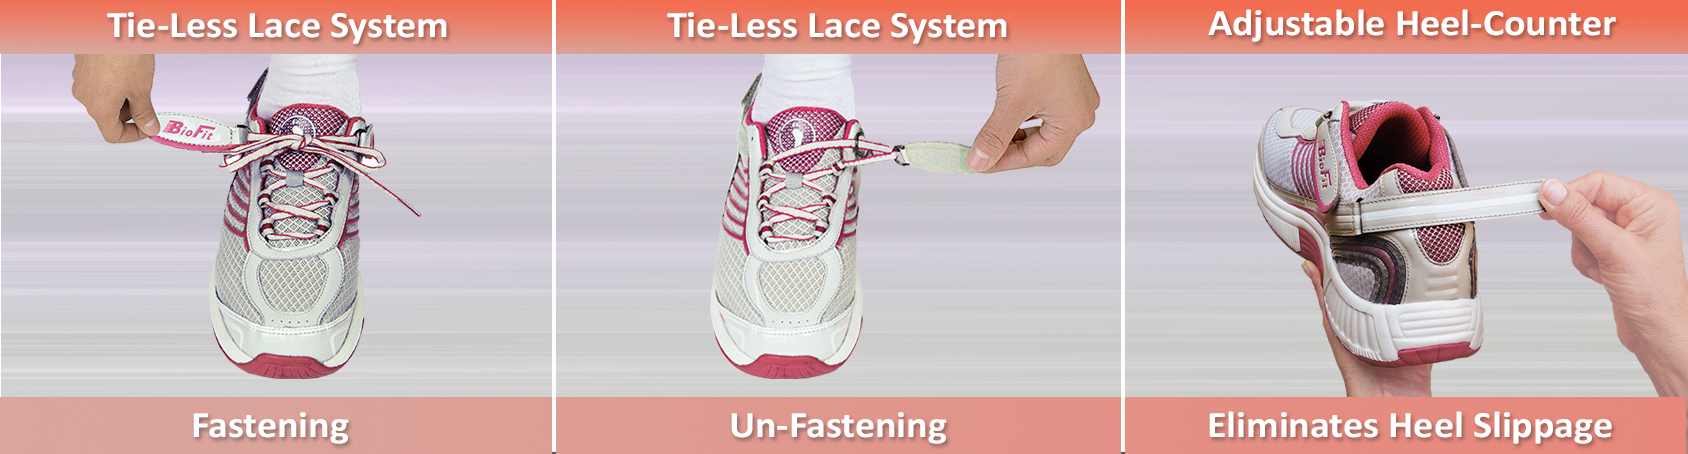 Tie Less Lace System | Orthofeet